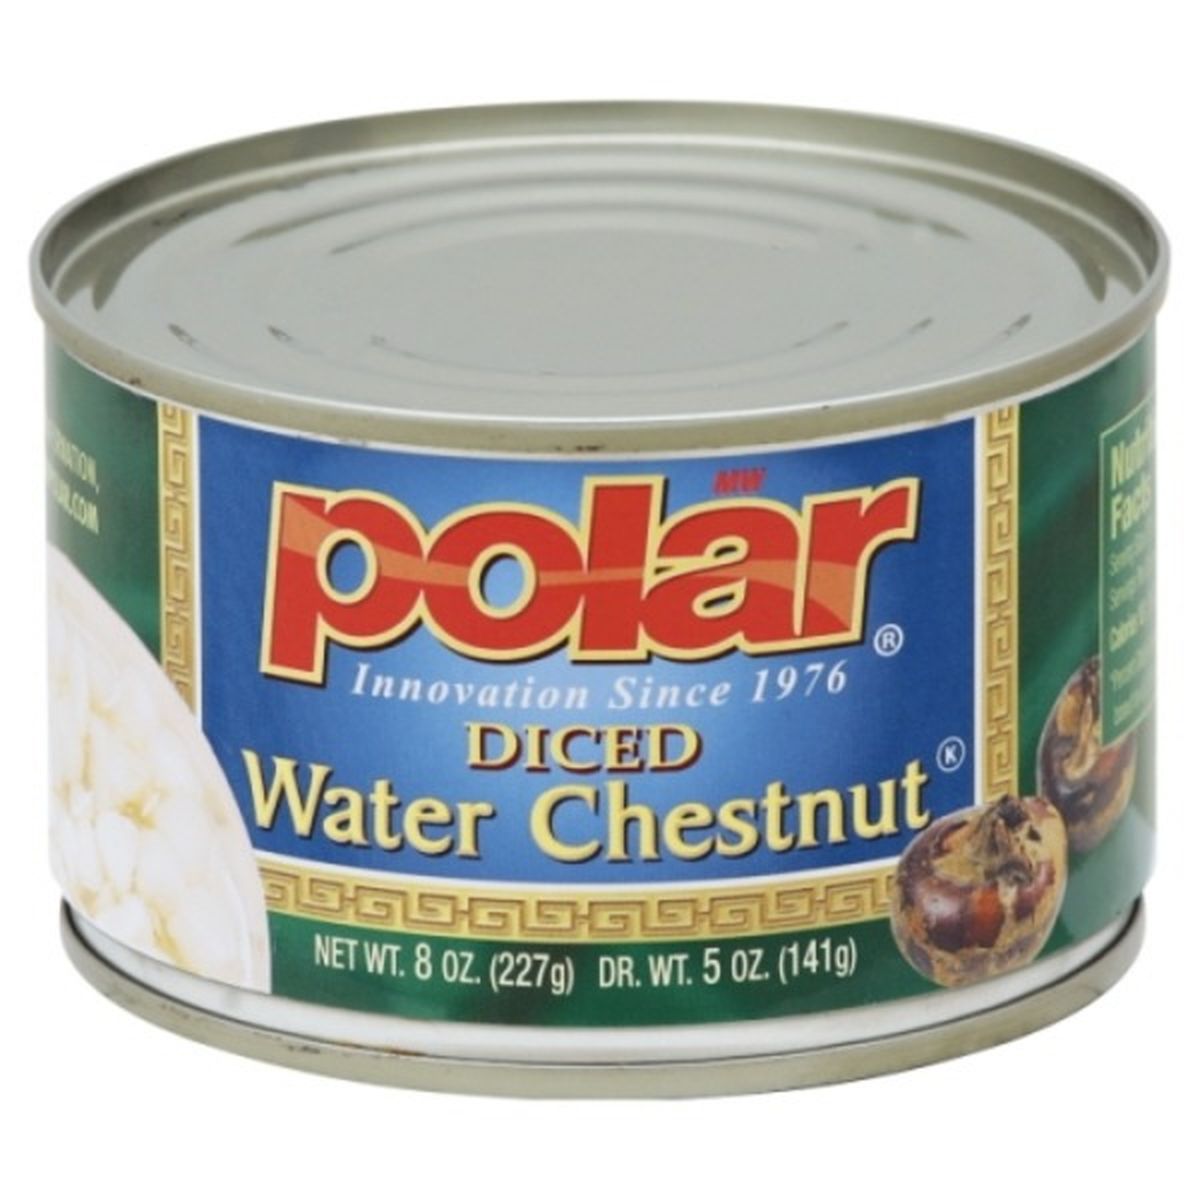 Calories in Polar Water Chestnut, Diced